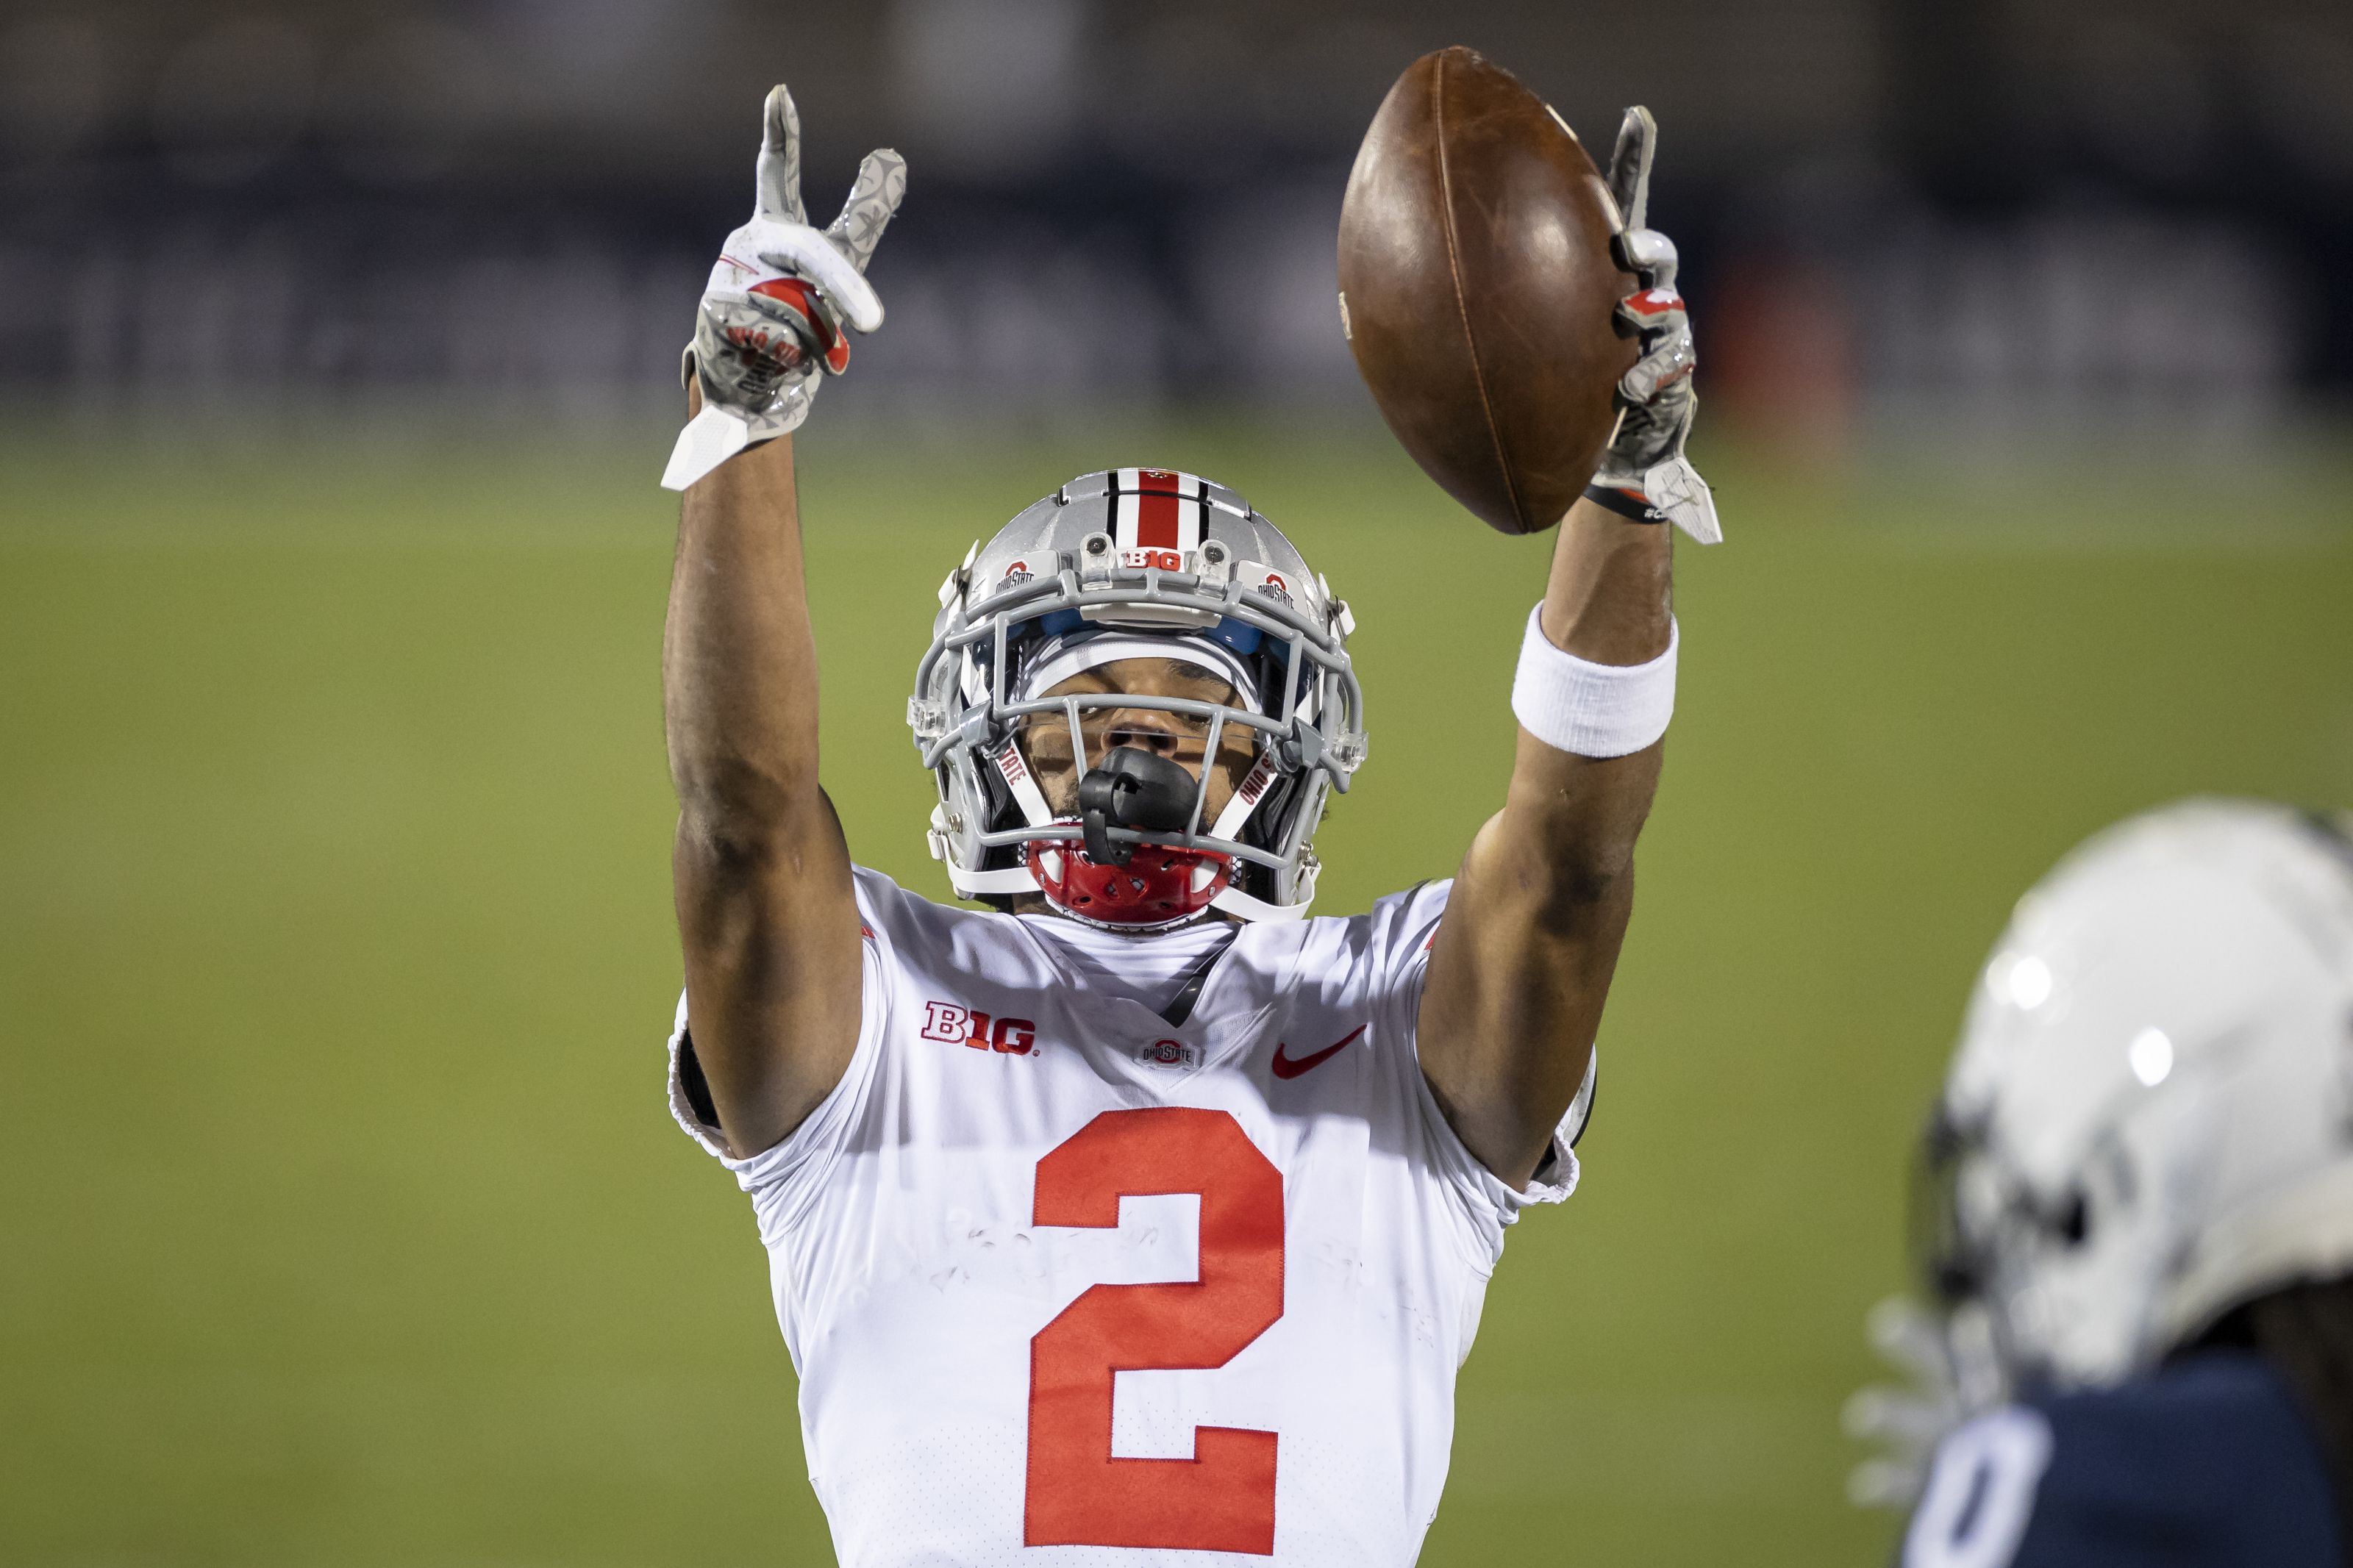 reasons why the Ohio State Buckeyes will trample Rutgers